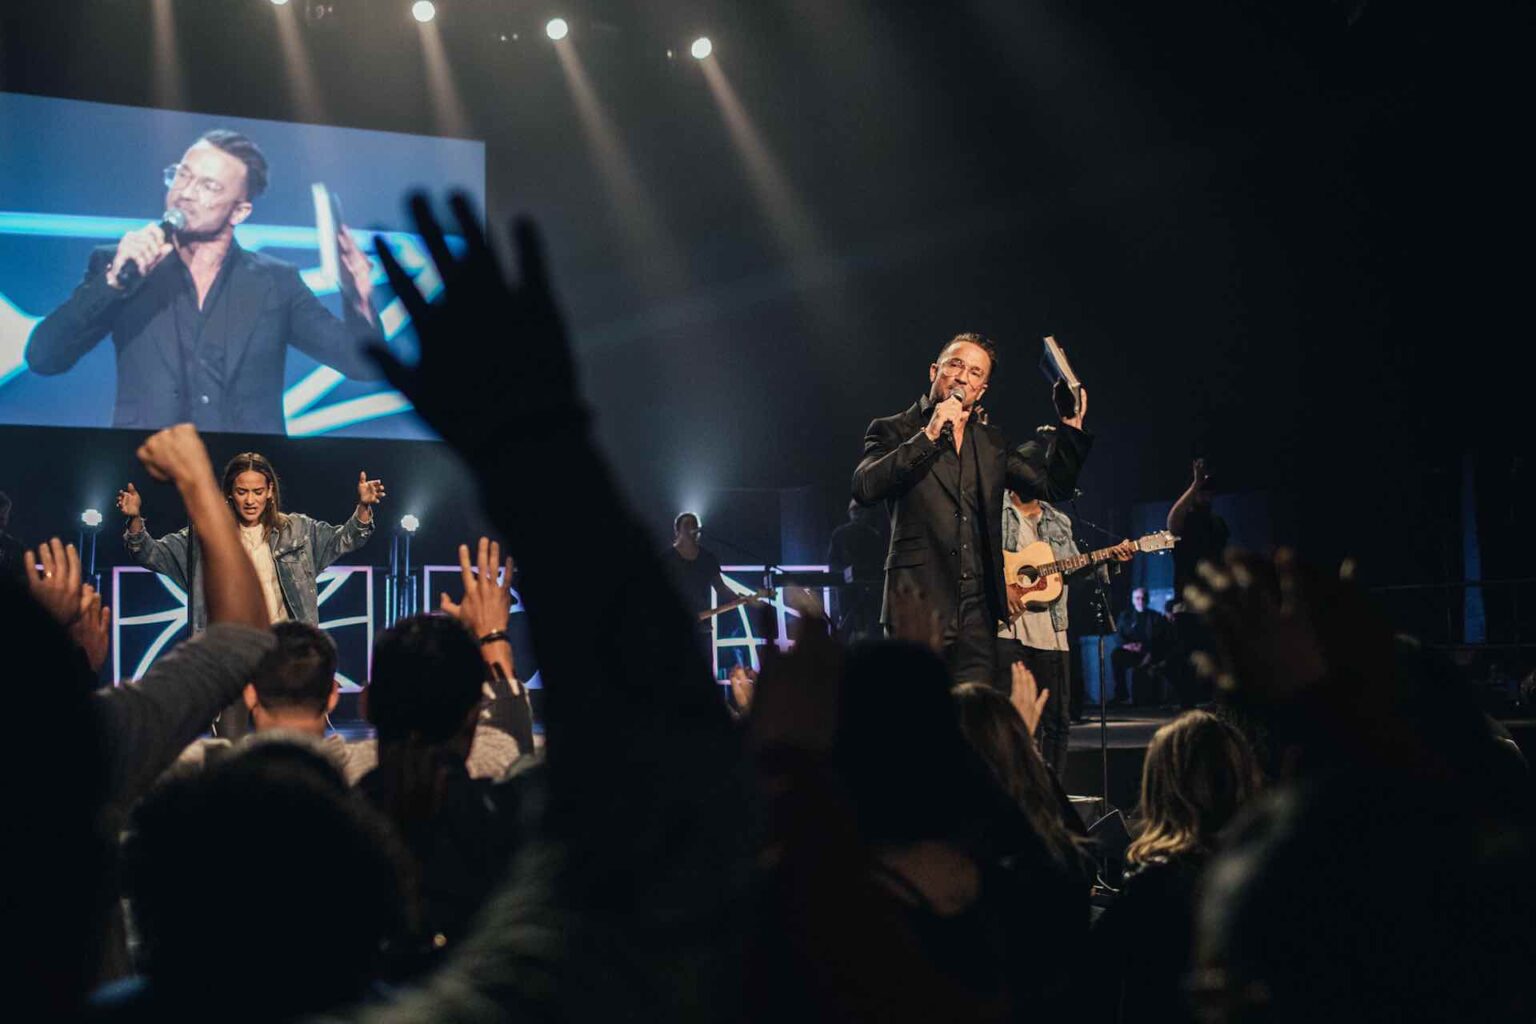 Hillsong Church advertised itself as a symbol of inclusion in Christianity. Today it's rot with scandal after scandal. Read the newest ones here.